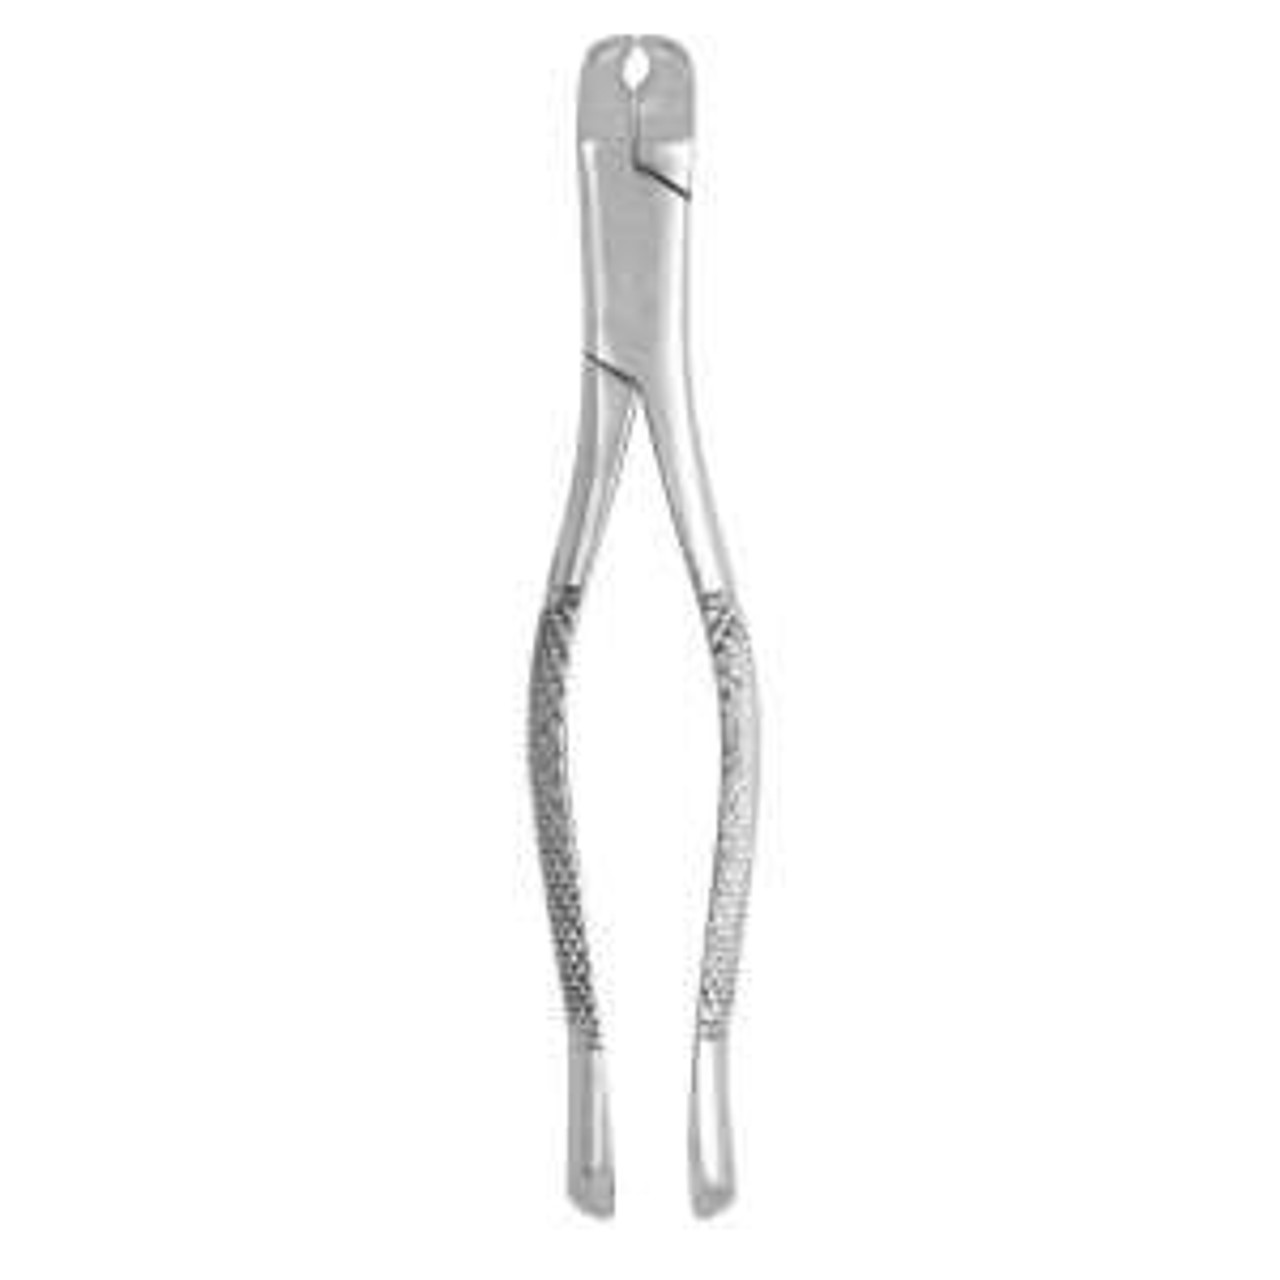 J & J Instruments - EXTRACTING FORCEPS #22 ENGLISH